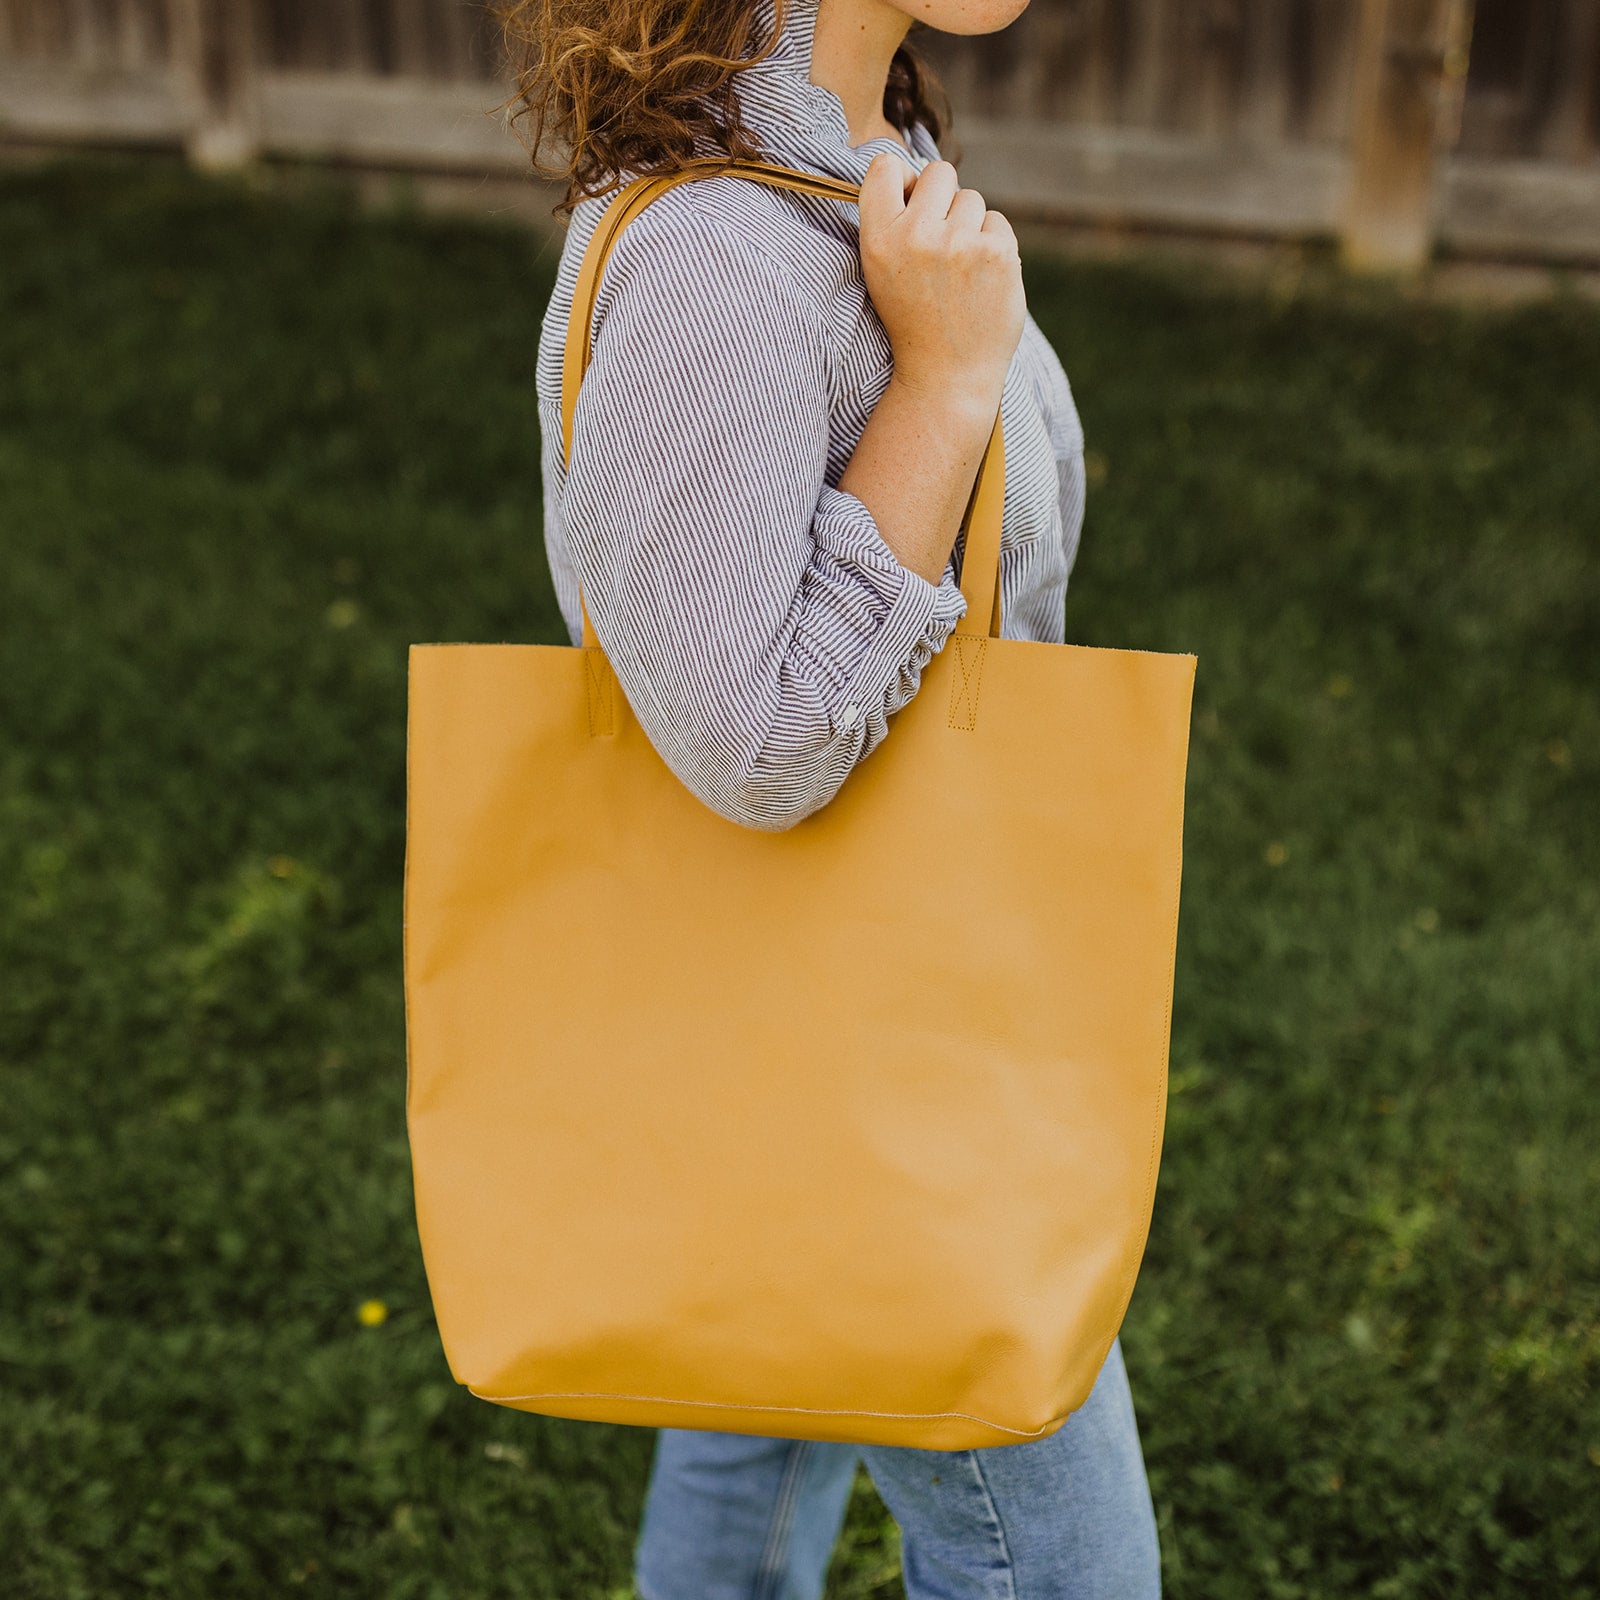 Adelisa &amp; Co large mustard yellow leather tote for women.